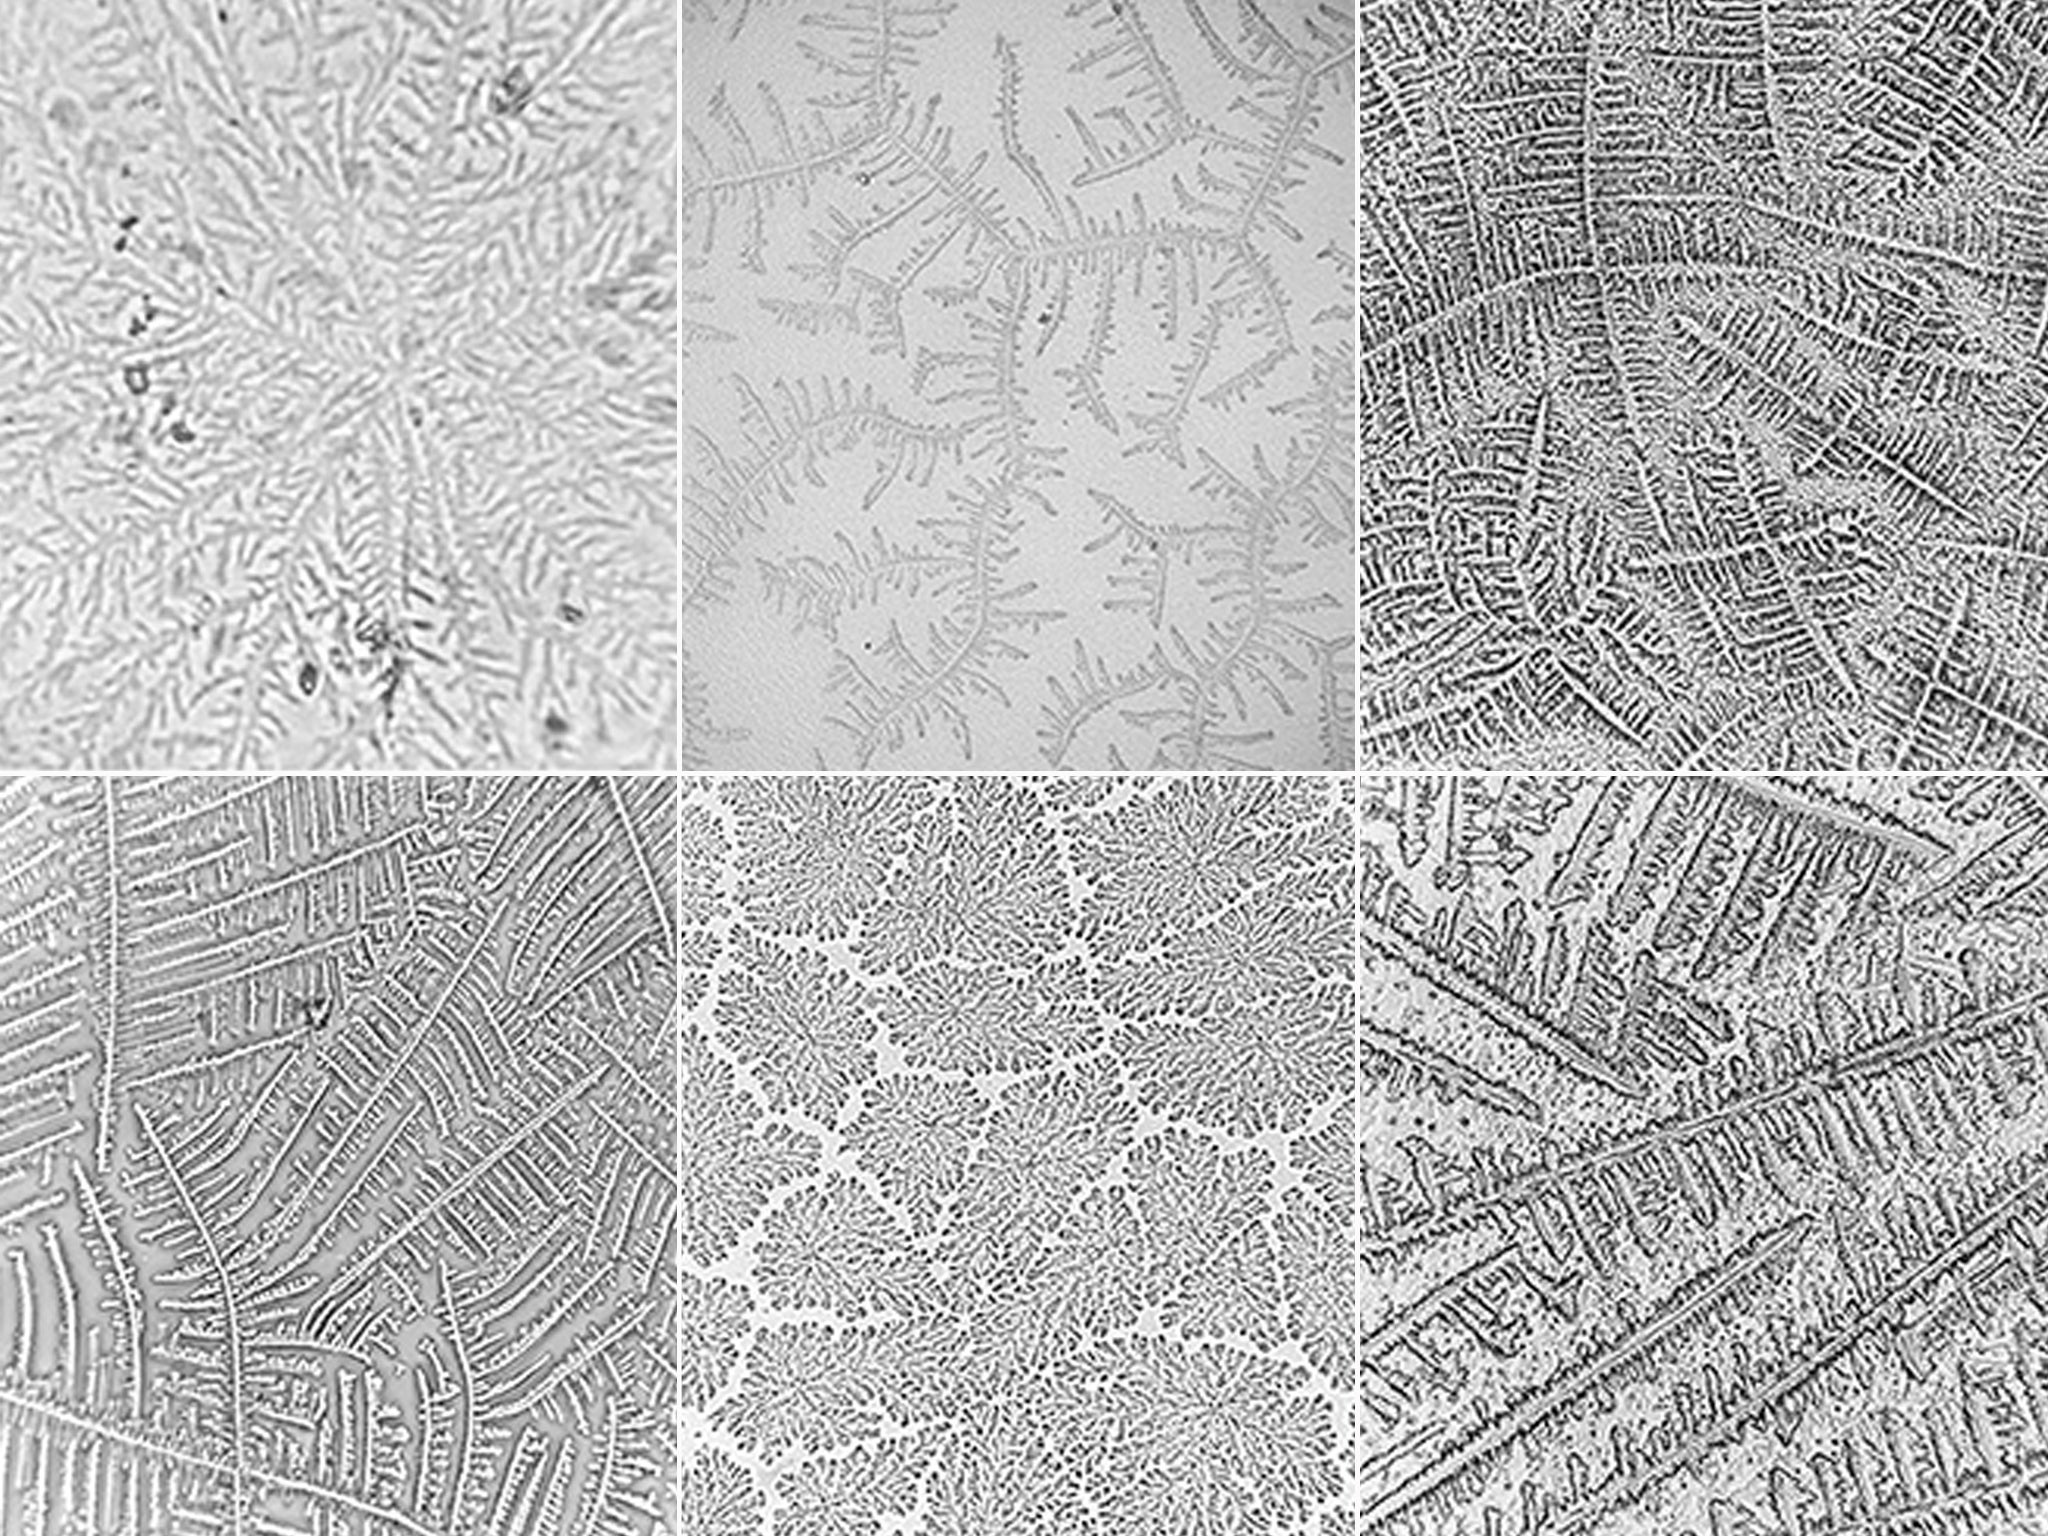 Clockwise from top left, the crystal patterns from the tears of a tortoise, a caiman, a hawk, a sea turtle, an owl and a parrot (Arianne P Oria et al)